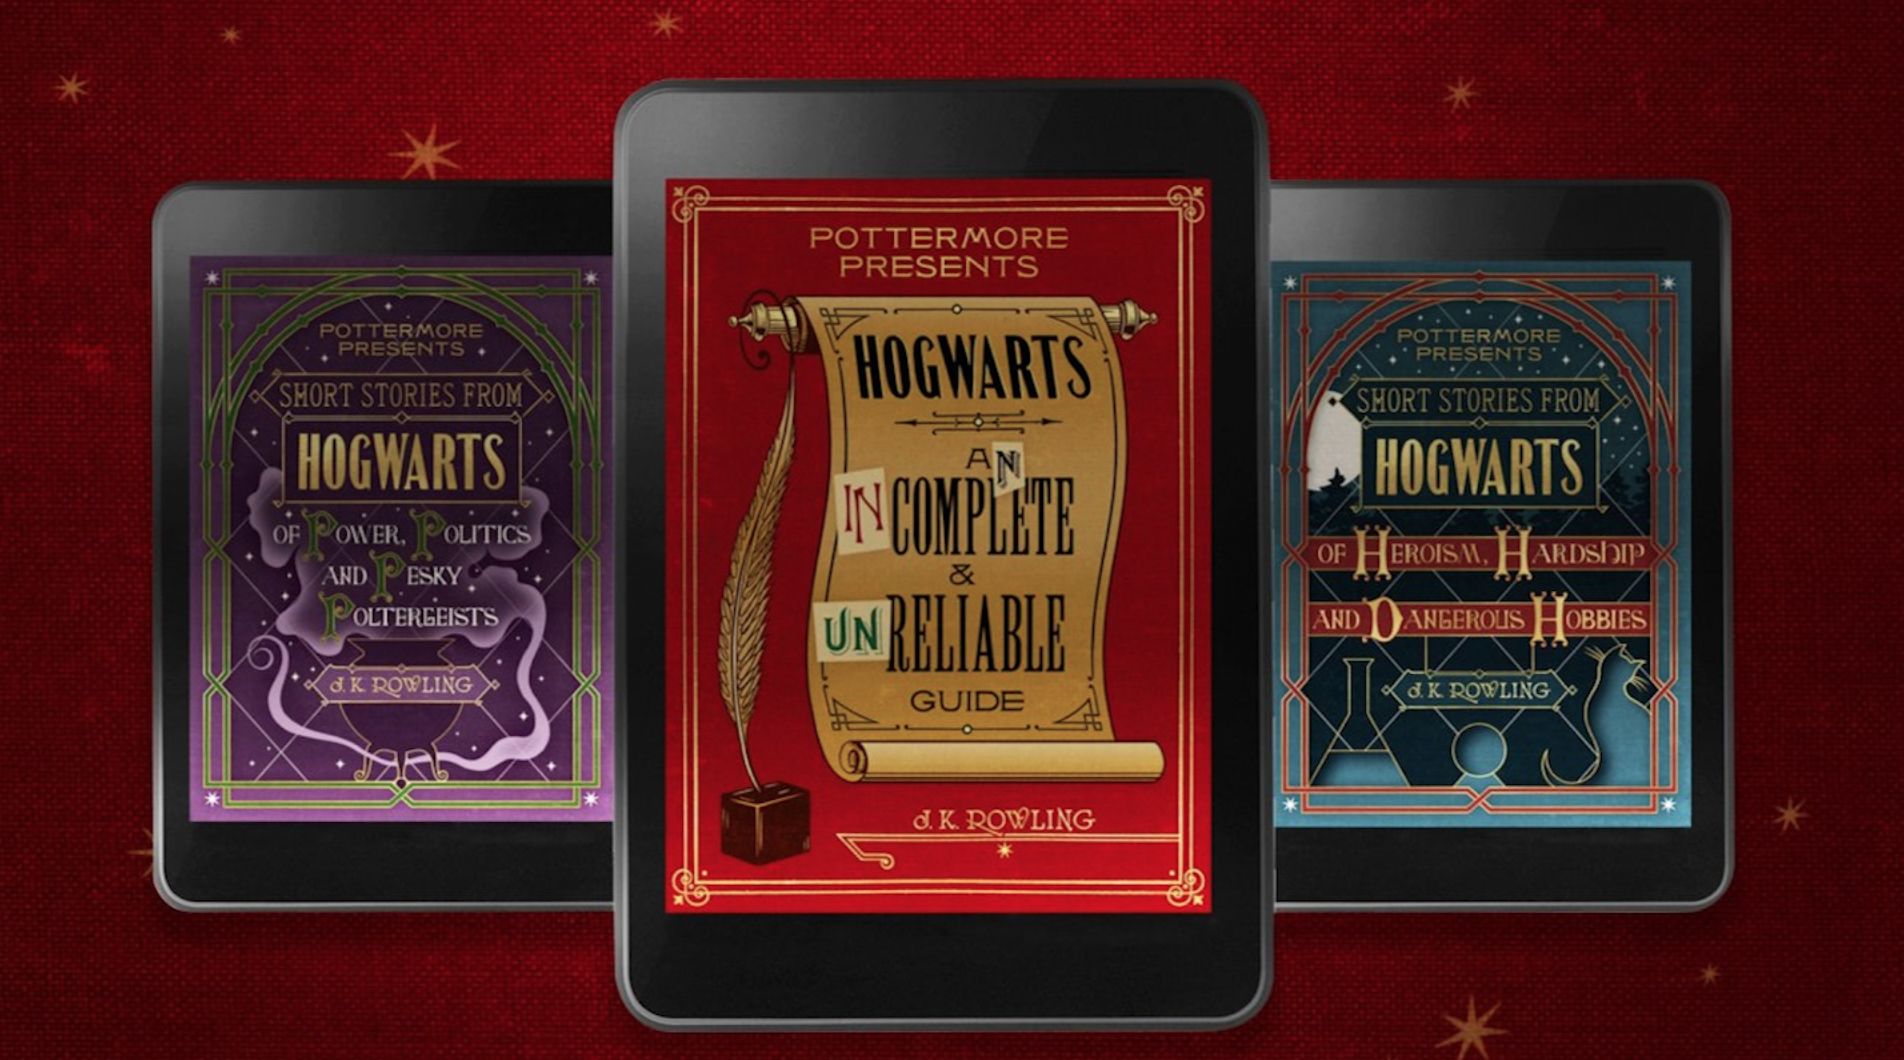 3 new Harry Potter books announced